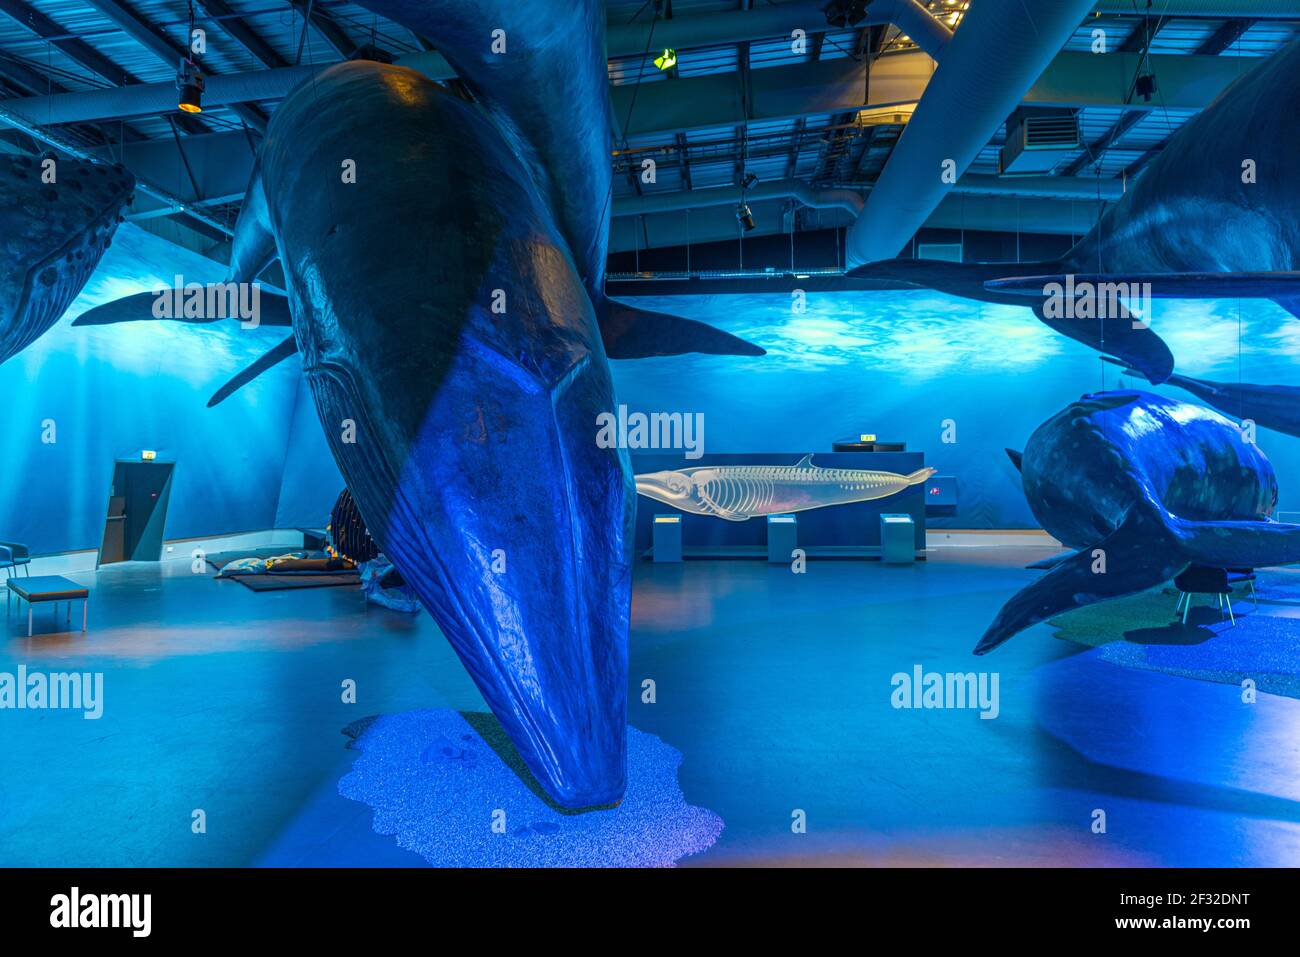 Reykjavik, Iceland, August 31, 2020: Exhibits at the Whales of Iceland museum in Reykjavik, Iceland Stock Photo